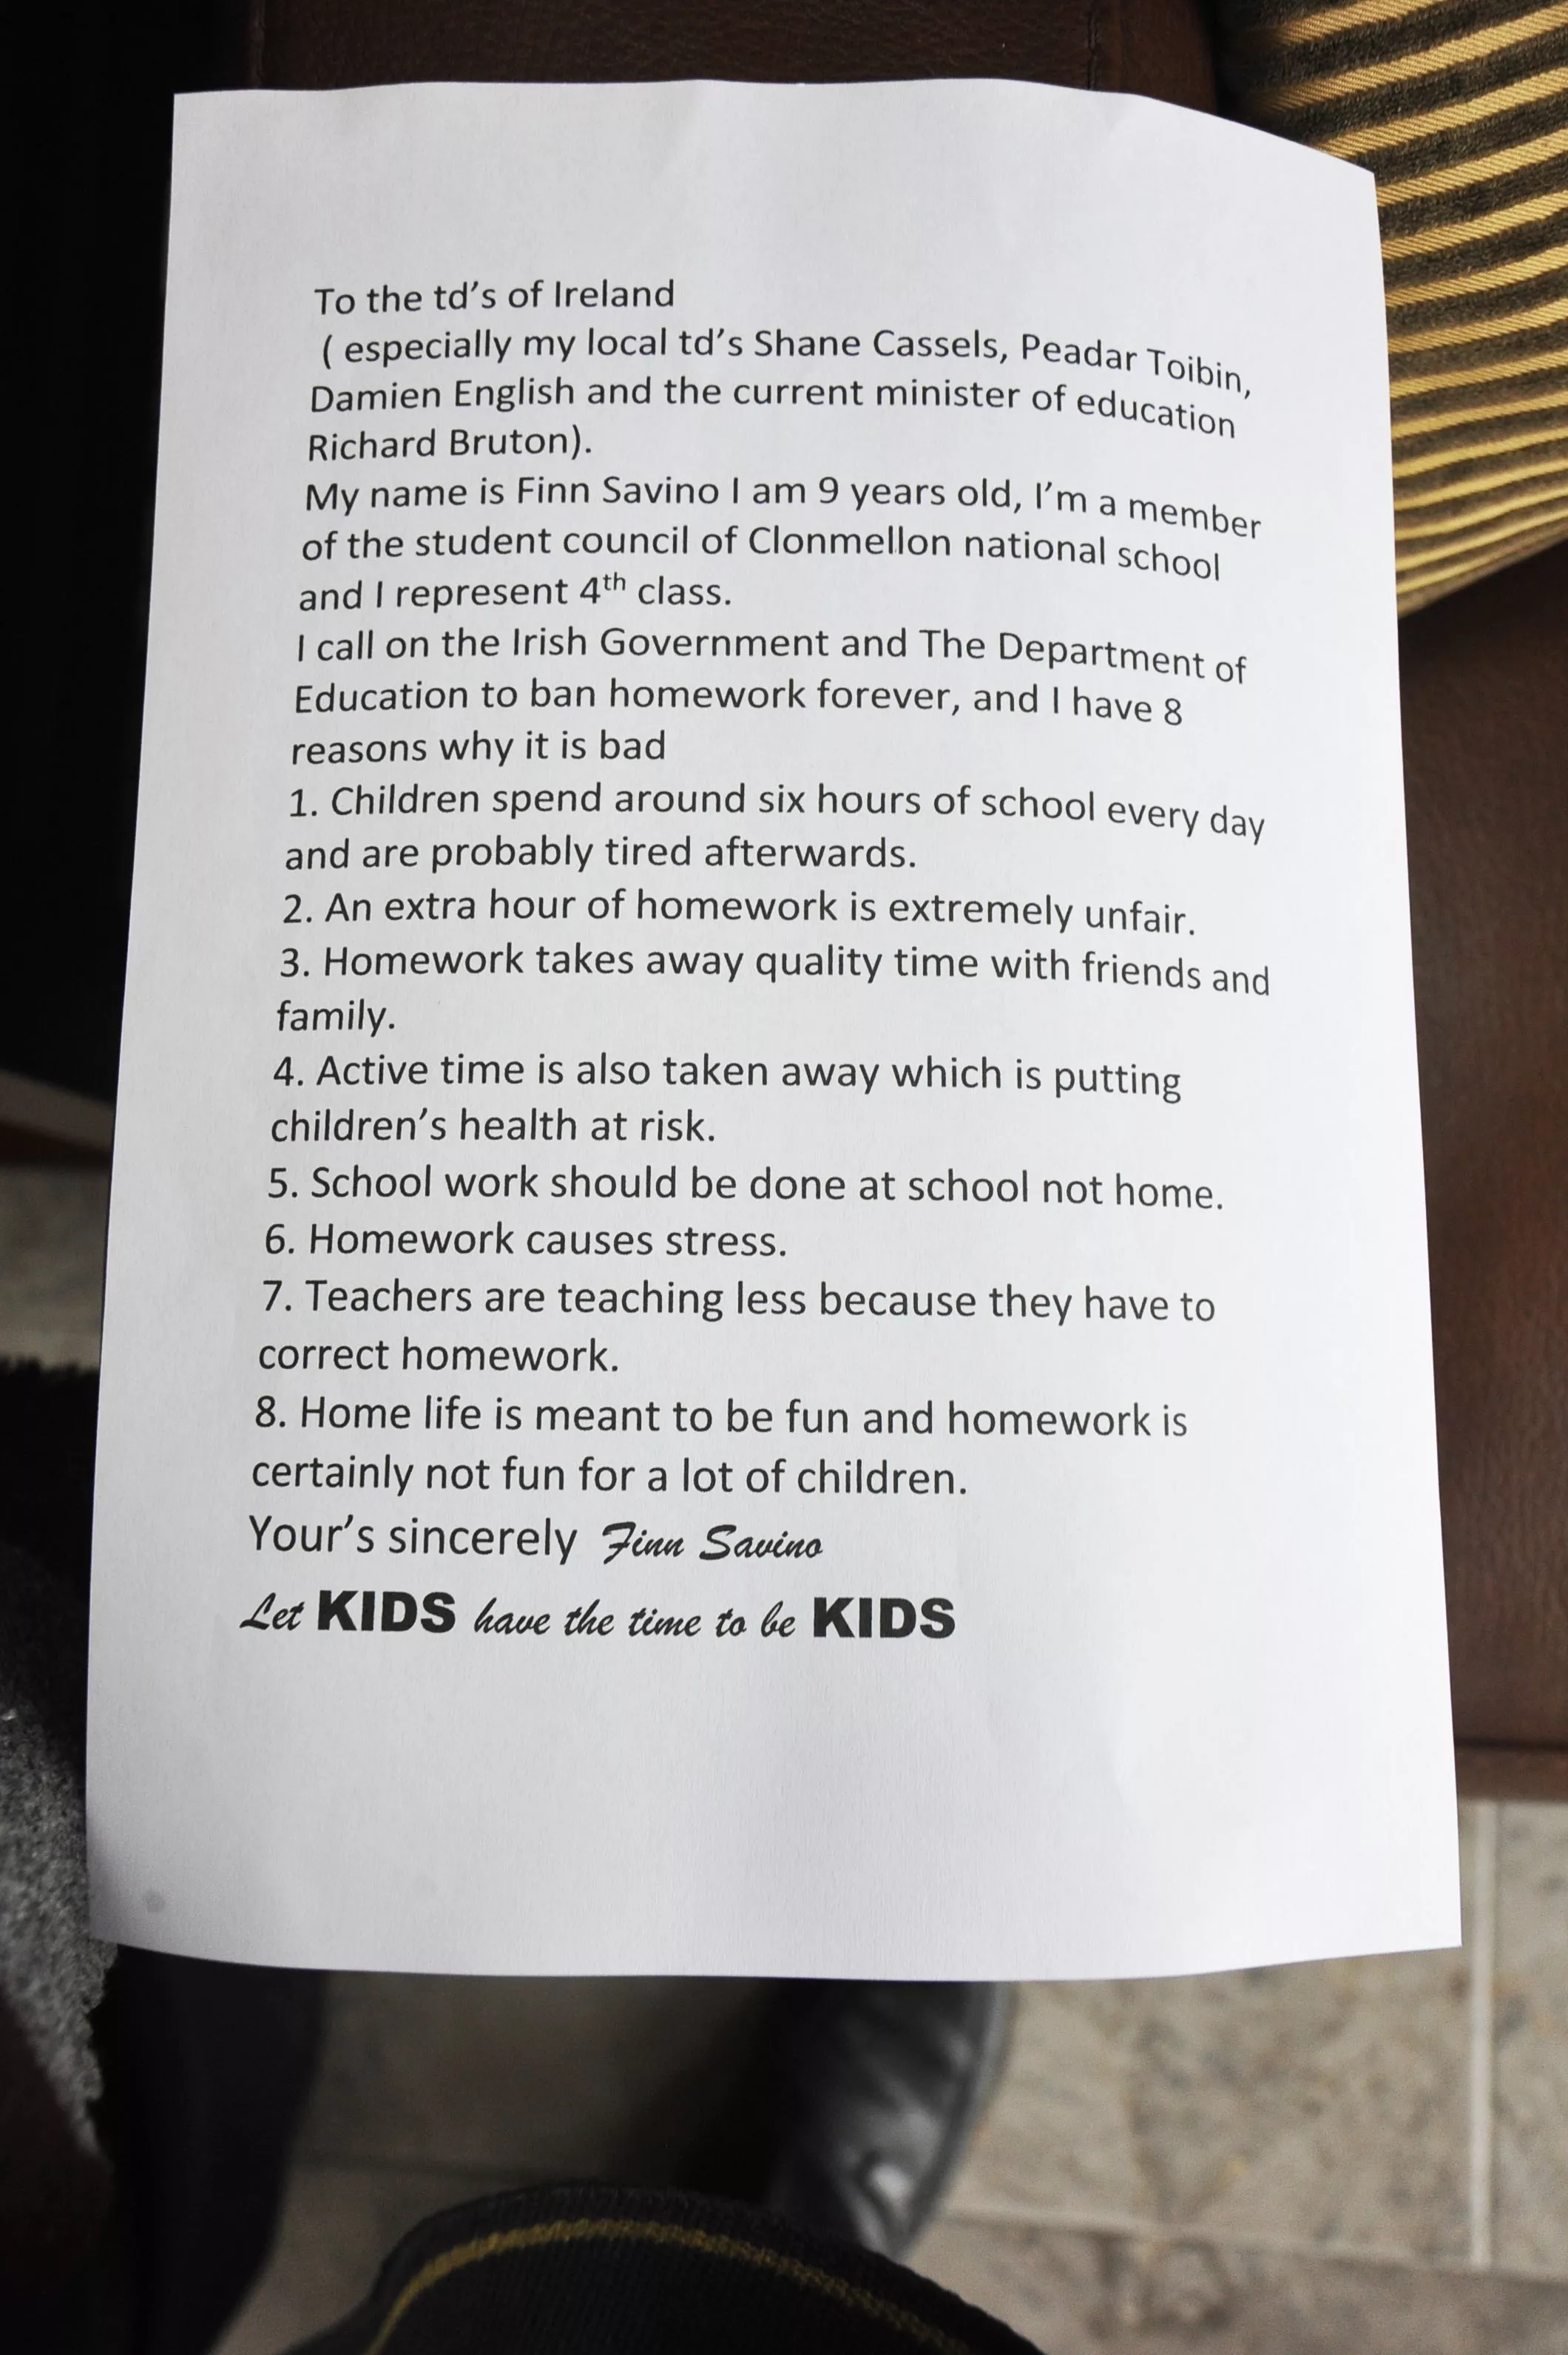 'Let kids have the time to be kids': Young student writes to TDs to abolish homework